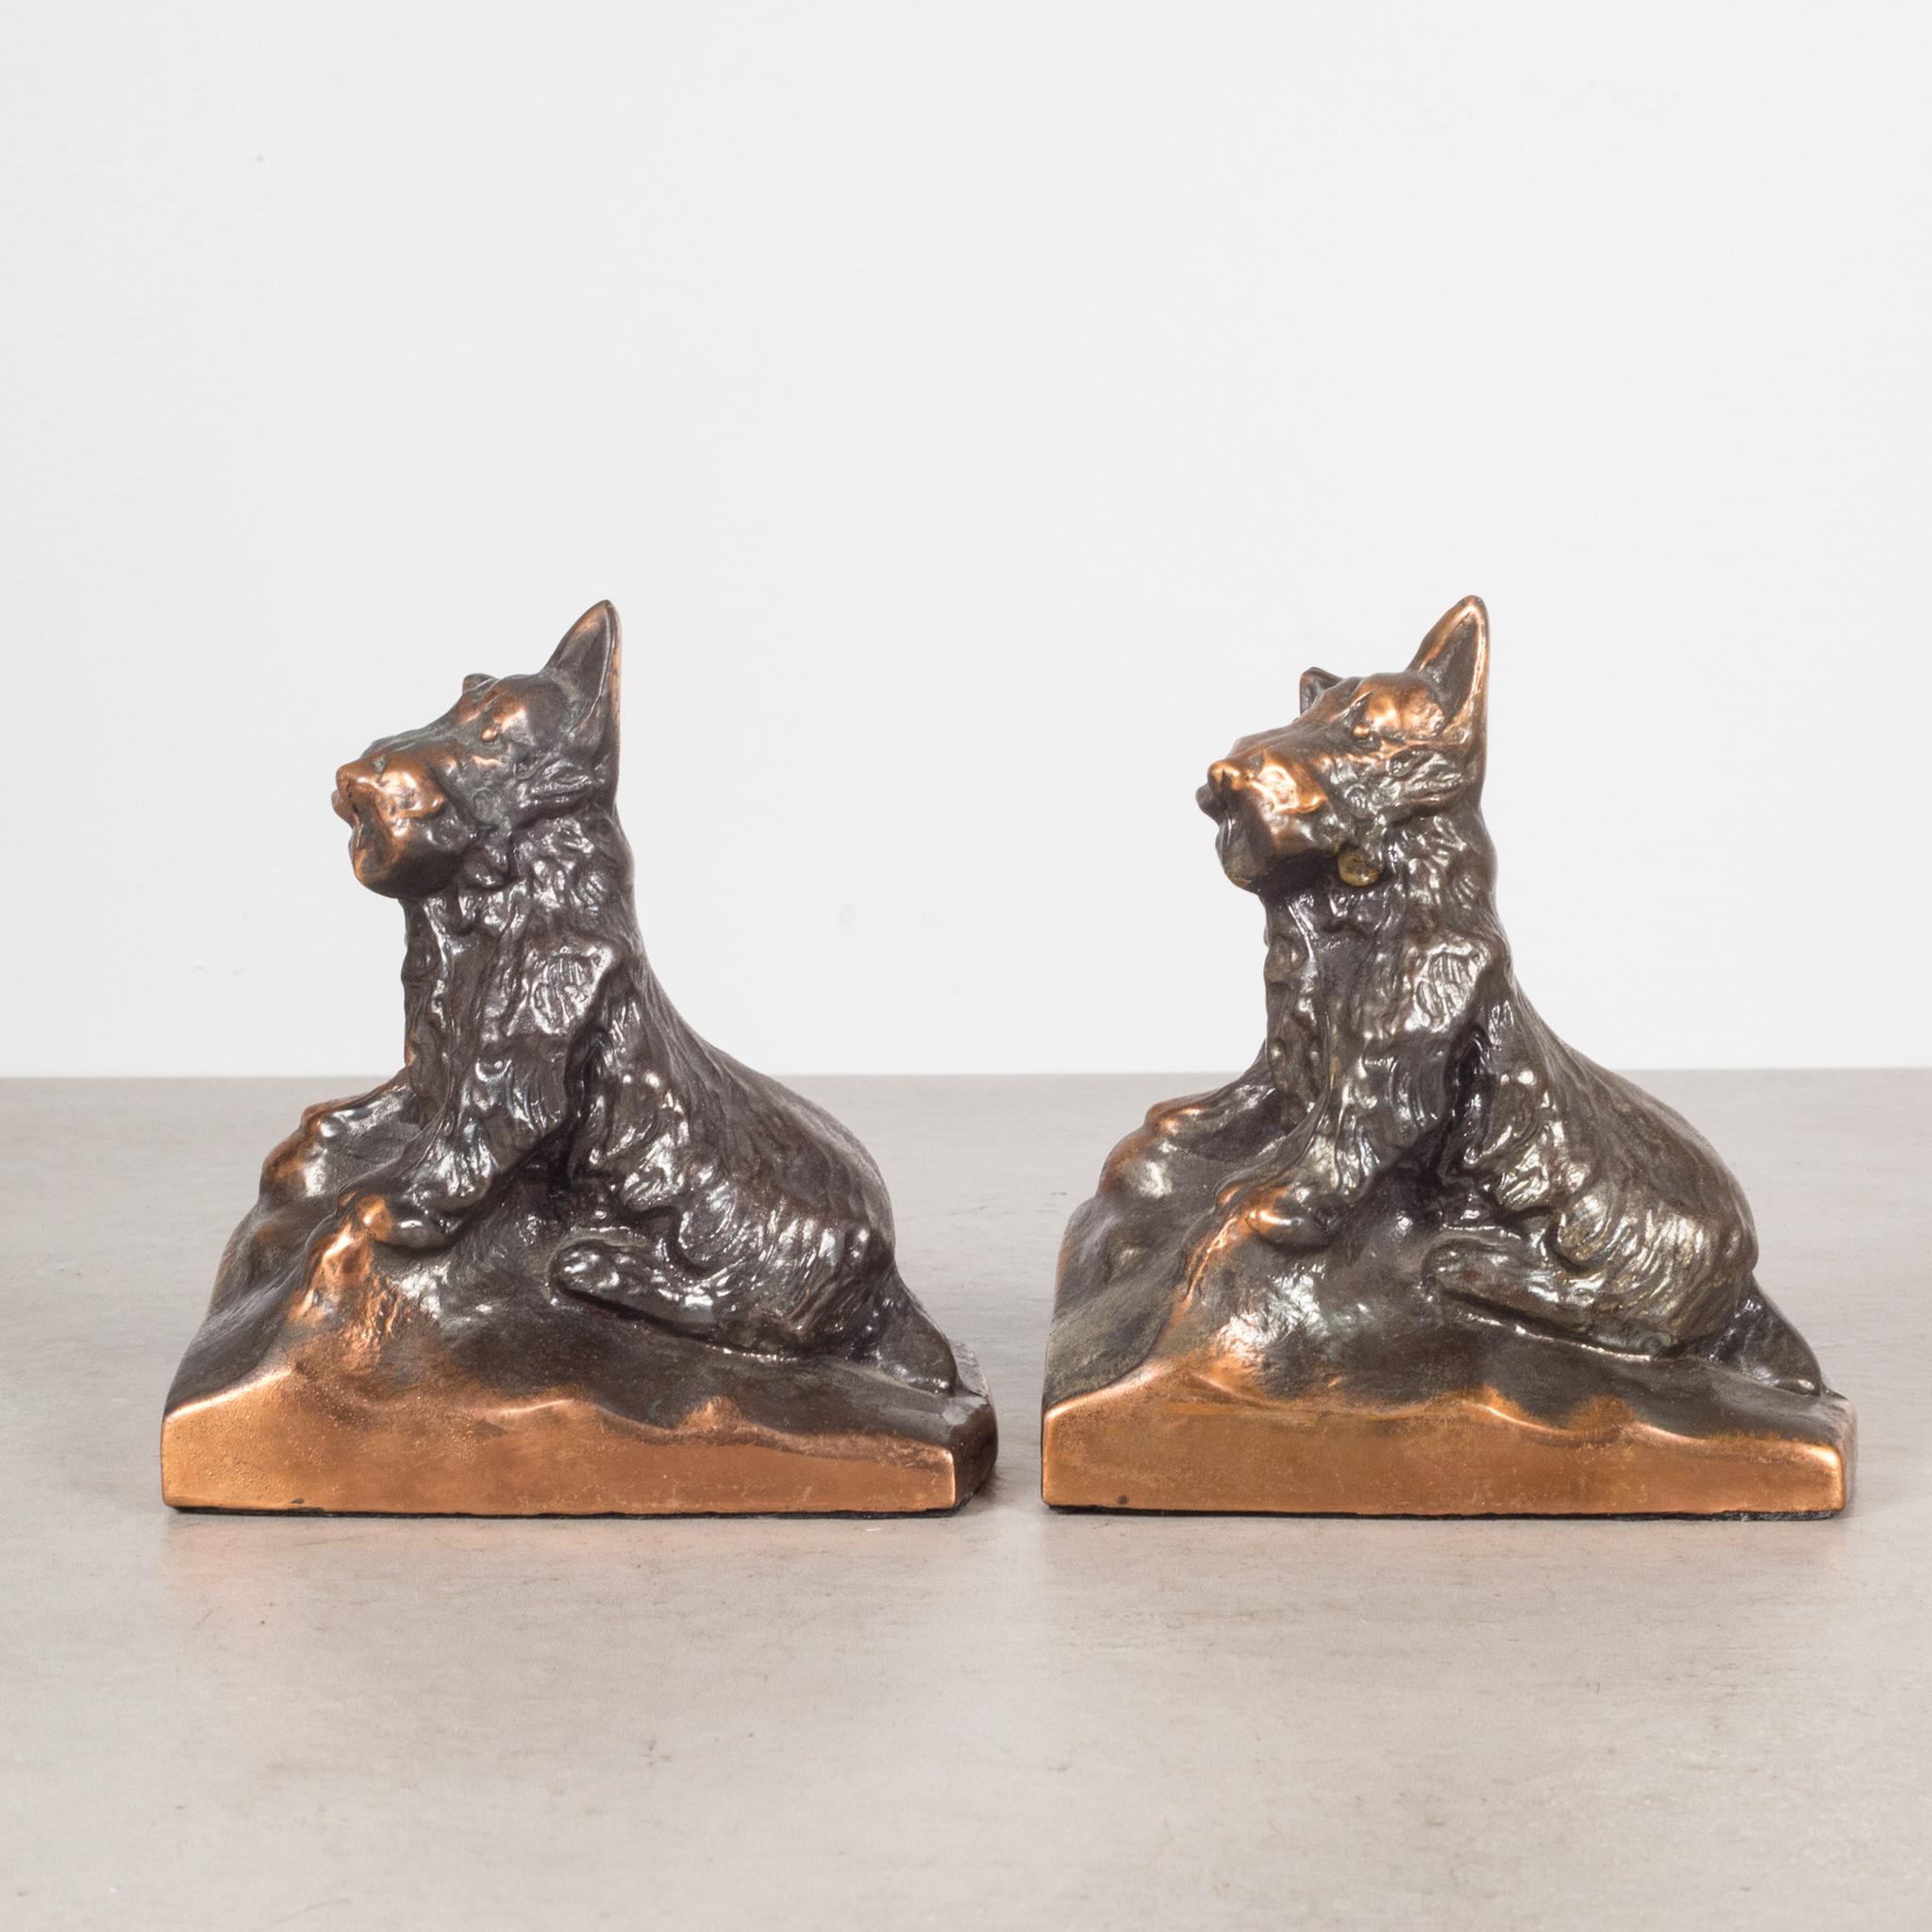 About

A vintage pair of bronze plated Scotty Dog bookends with original felt.

Creator Unknown.
Date of manufacture c.1940s.
Materials and techniques bronze plate, felt.
Condition good. Wear consistent with age and use.
Dimensions H 5 in. X